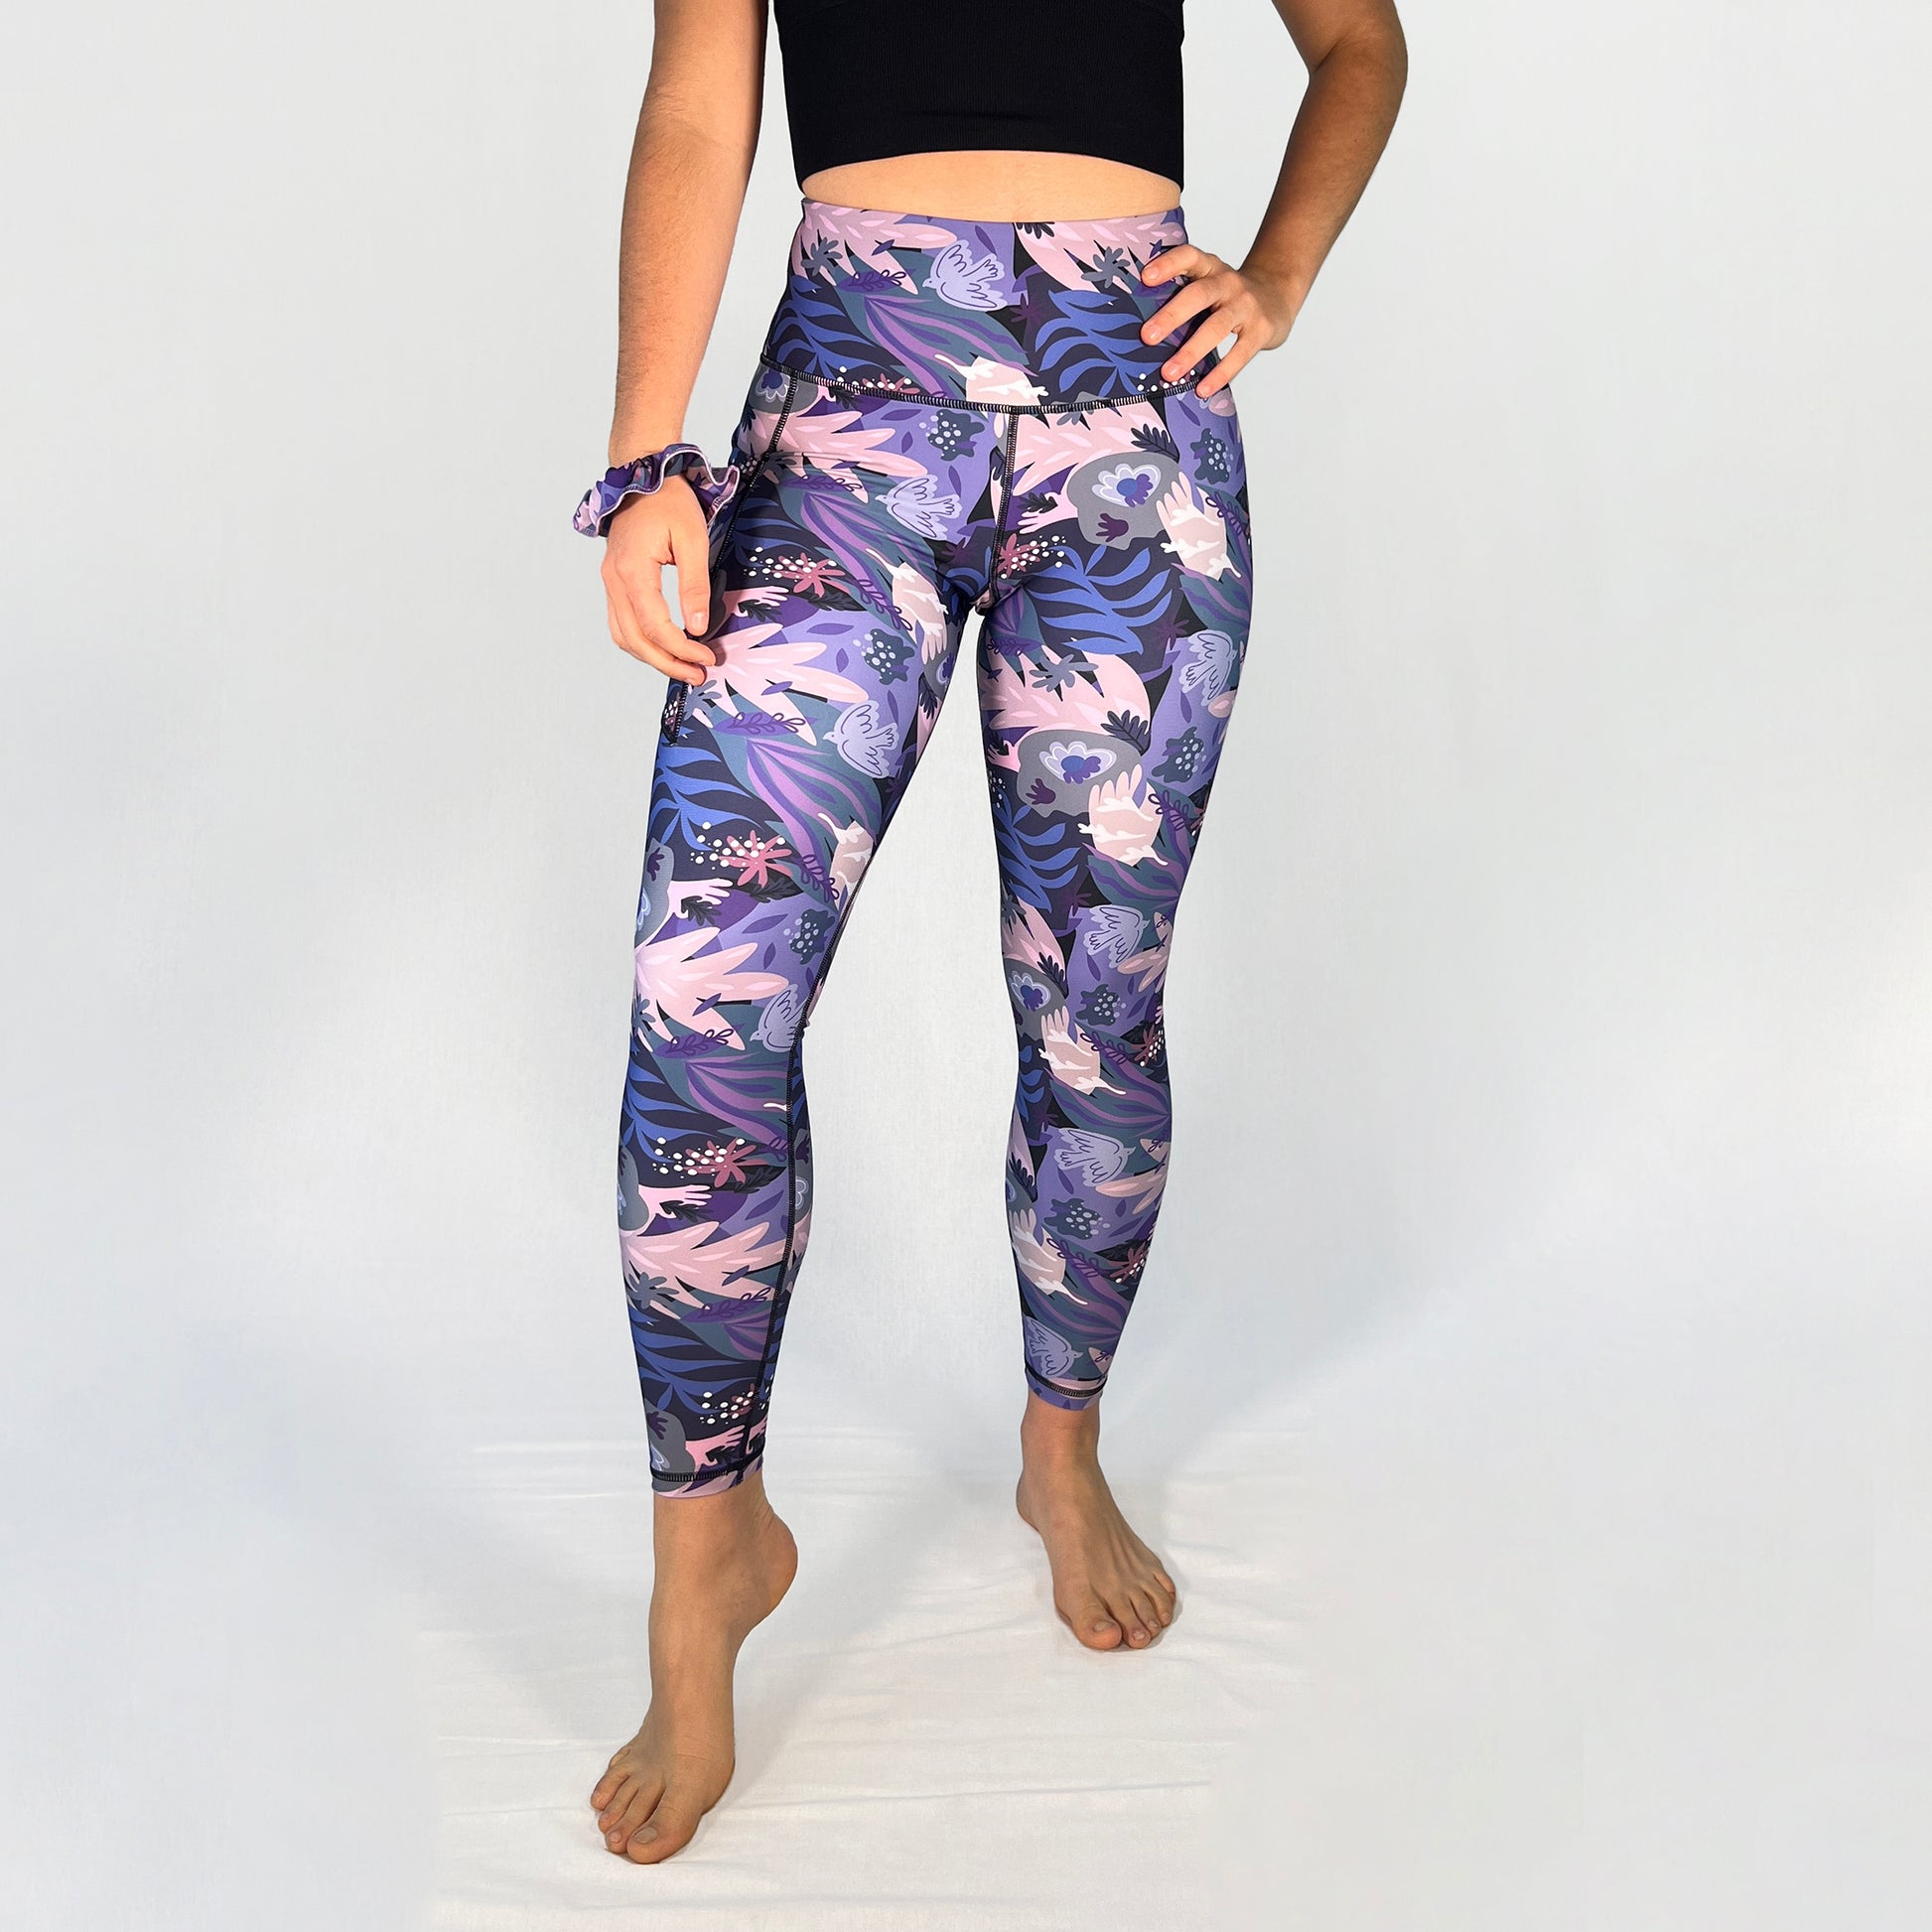 Front view of full-length leggings with pocket in Paloma design by Art2Go Monique Baques